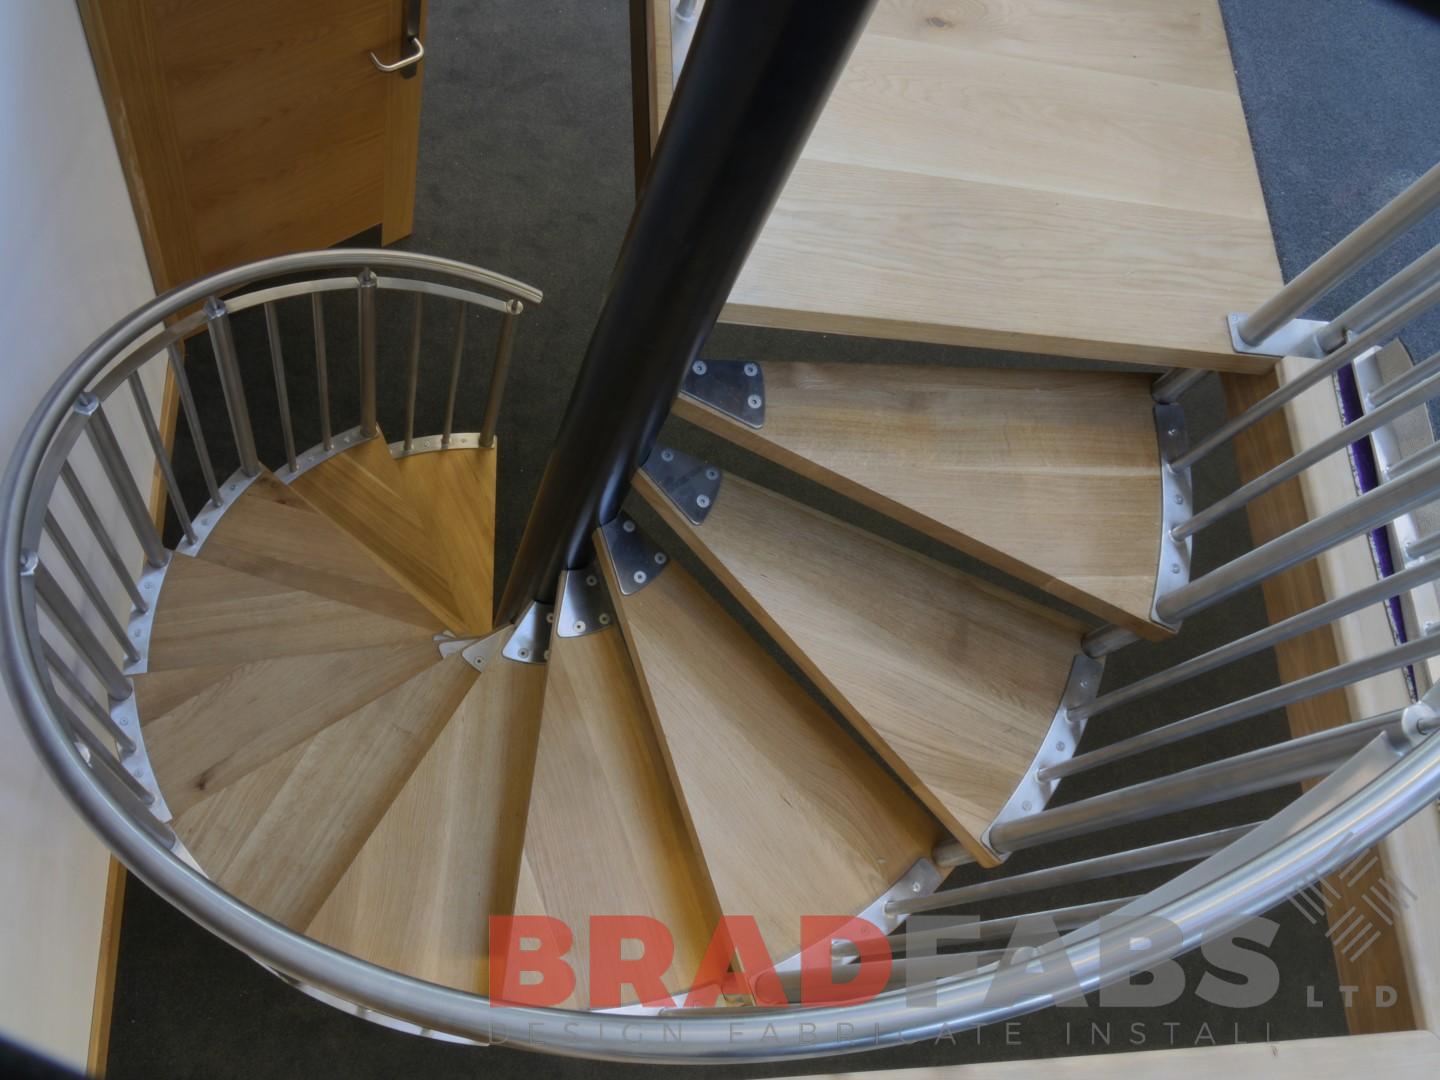 Bradfabs designed and installed this unique oak stainless spiral staircase, installed in Yorkshire